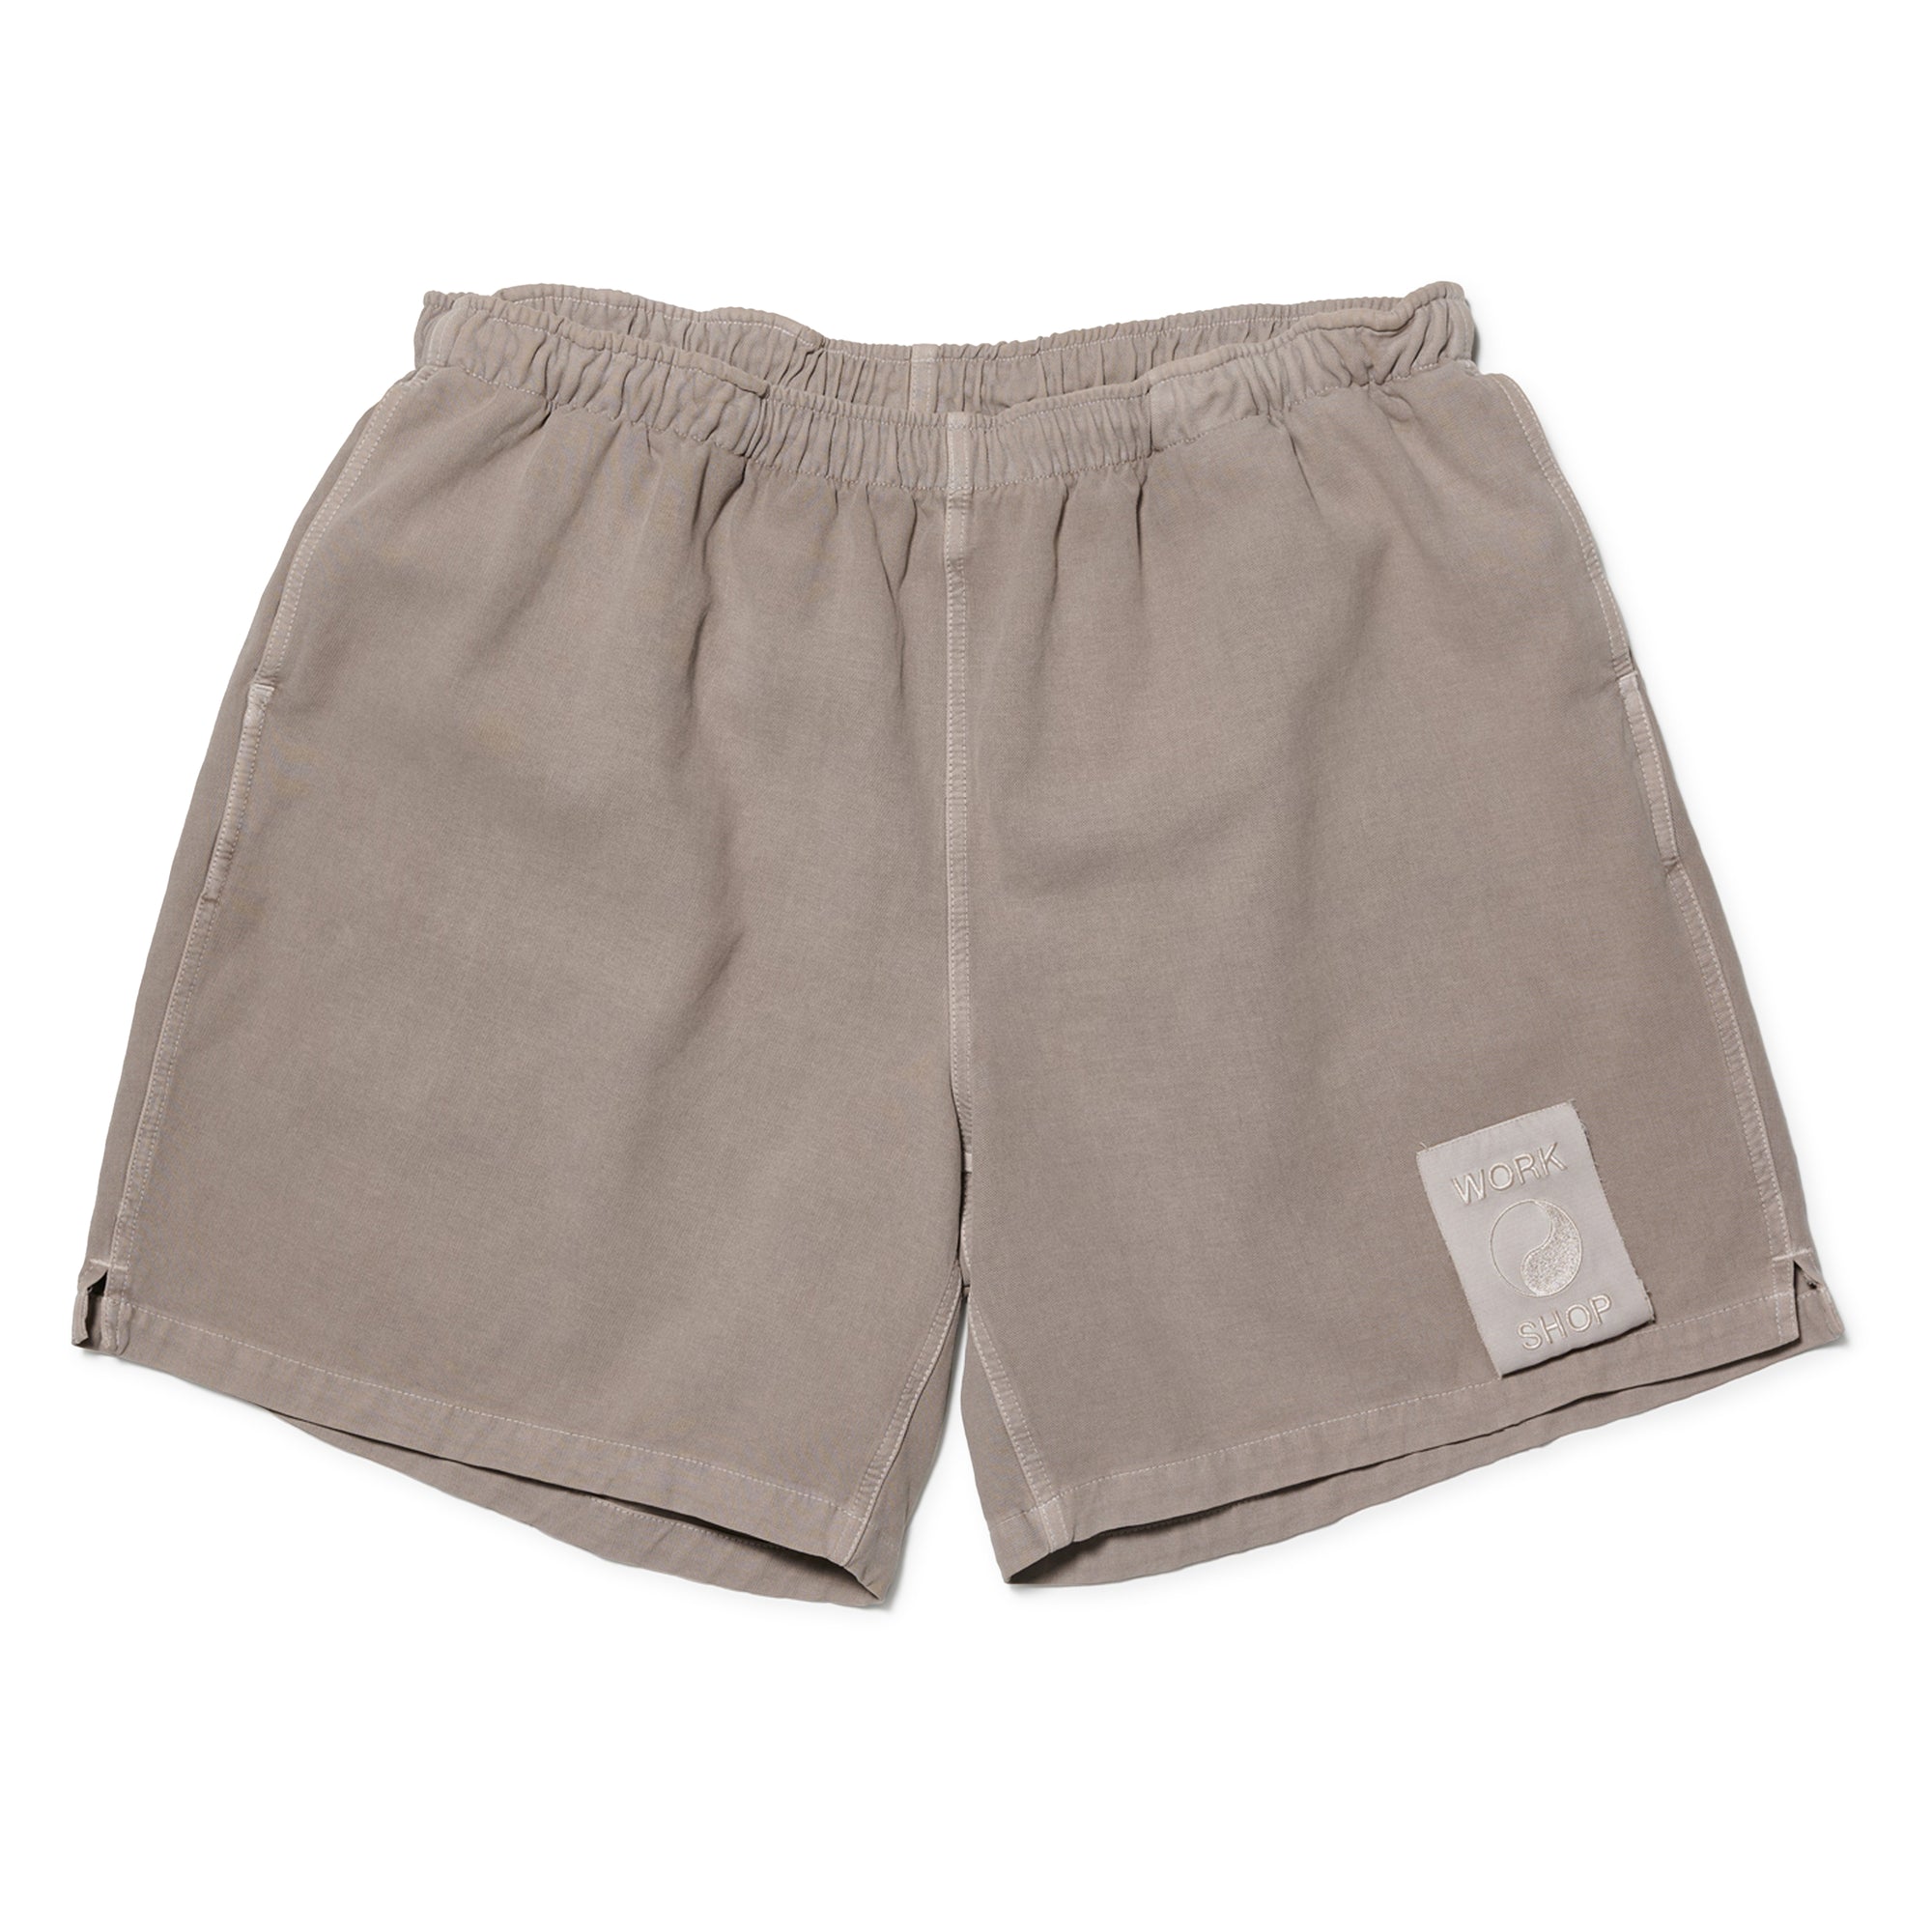 Our Legacy - Men's Work Shop Shorts - (Bruno) view 1